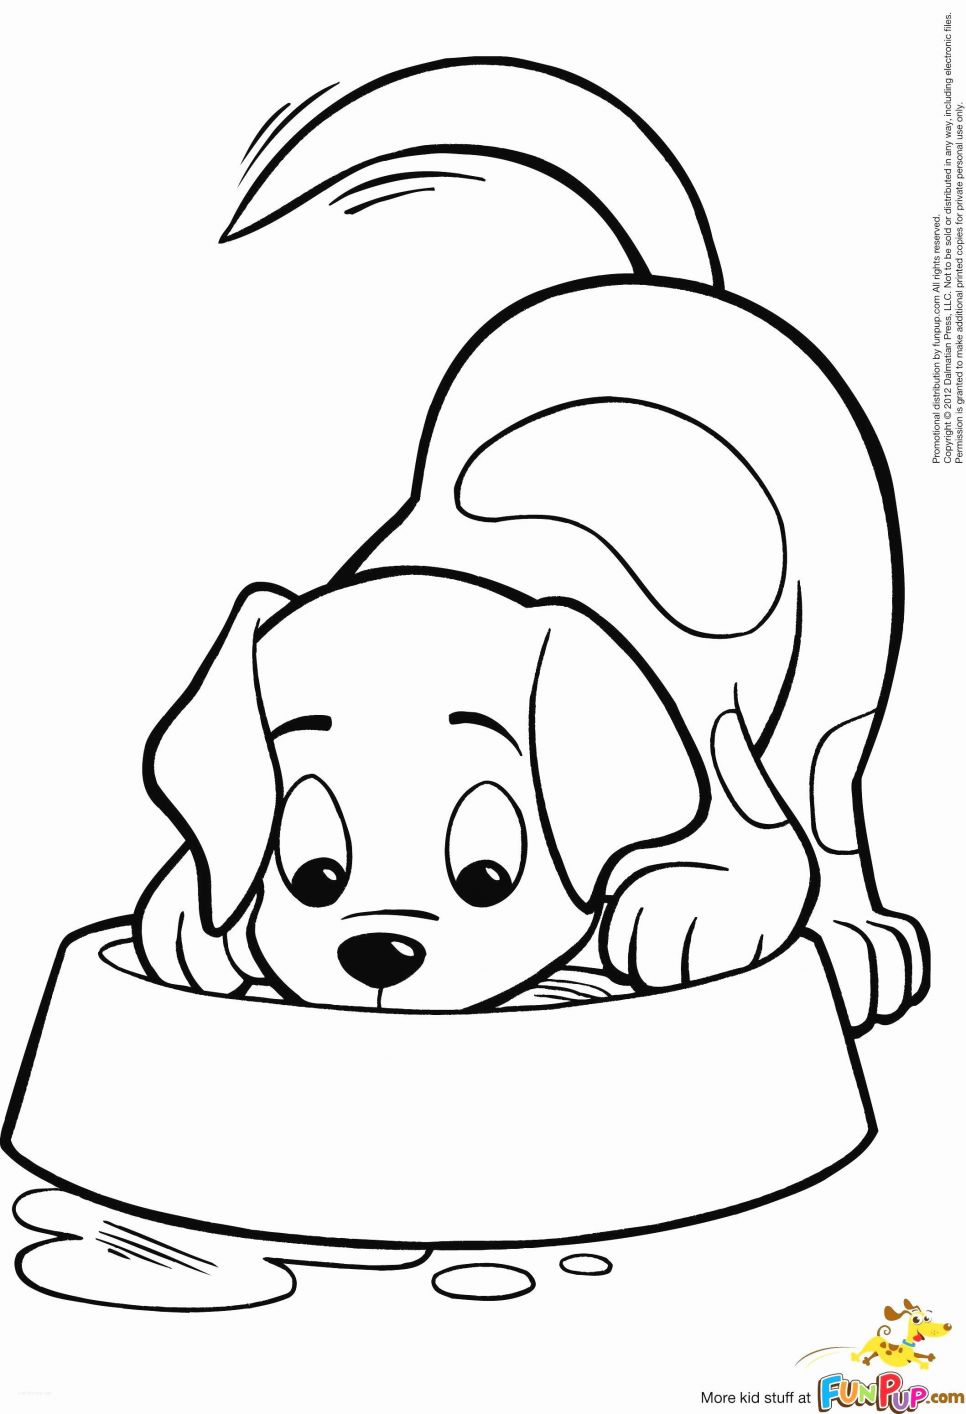 coloring pages : Free Printable Animal Coloring Pages Awesome Dog Coloring  Pages Free Printable In 2020 Free Printable Animal Coloring Pages ~ peak